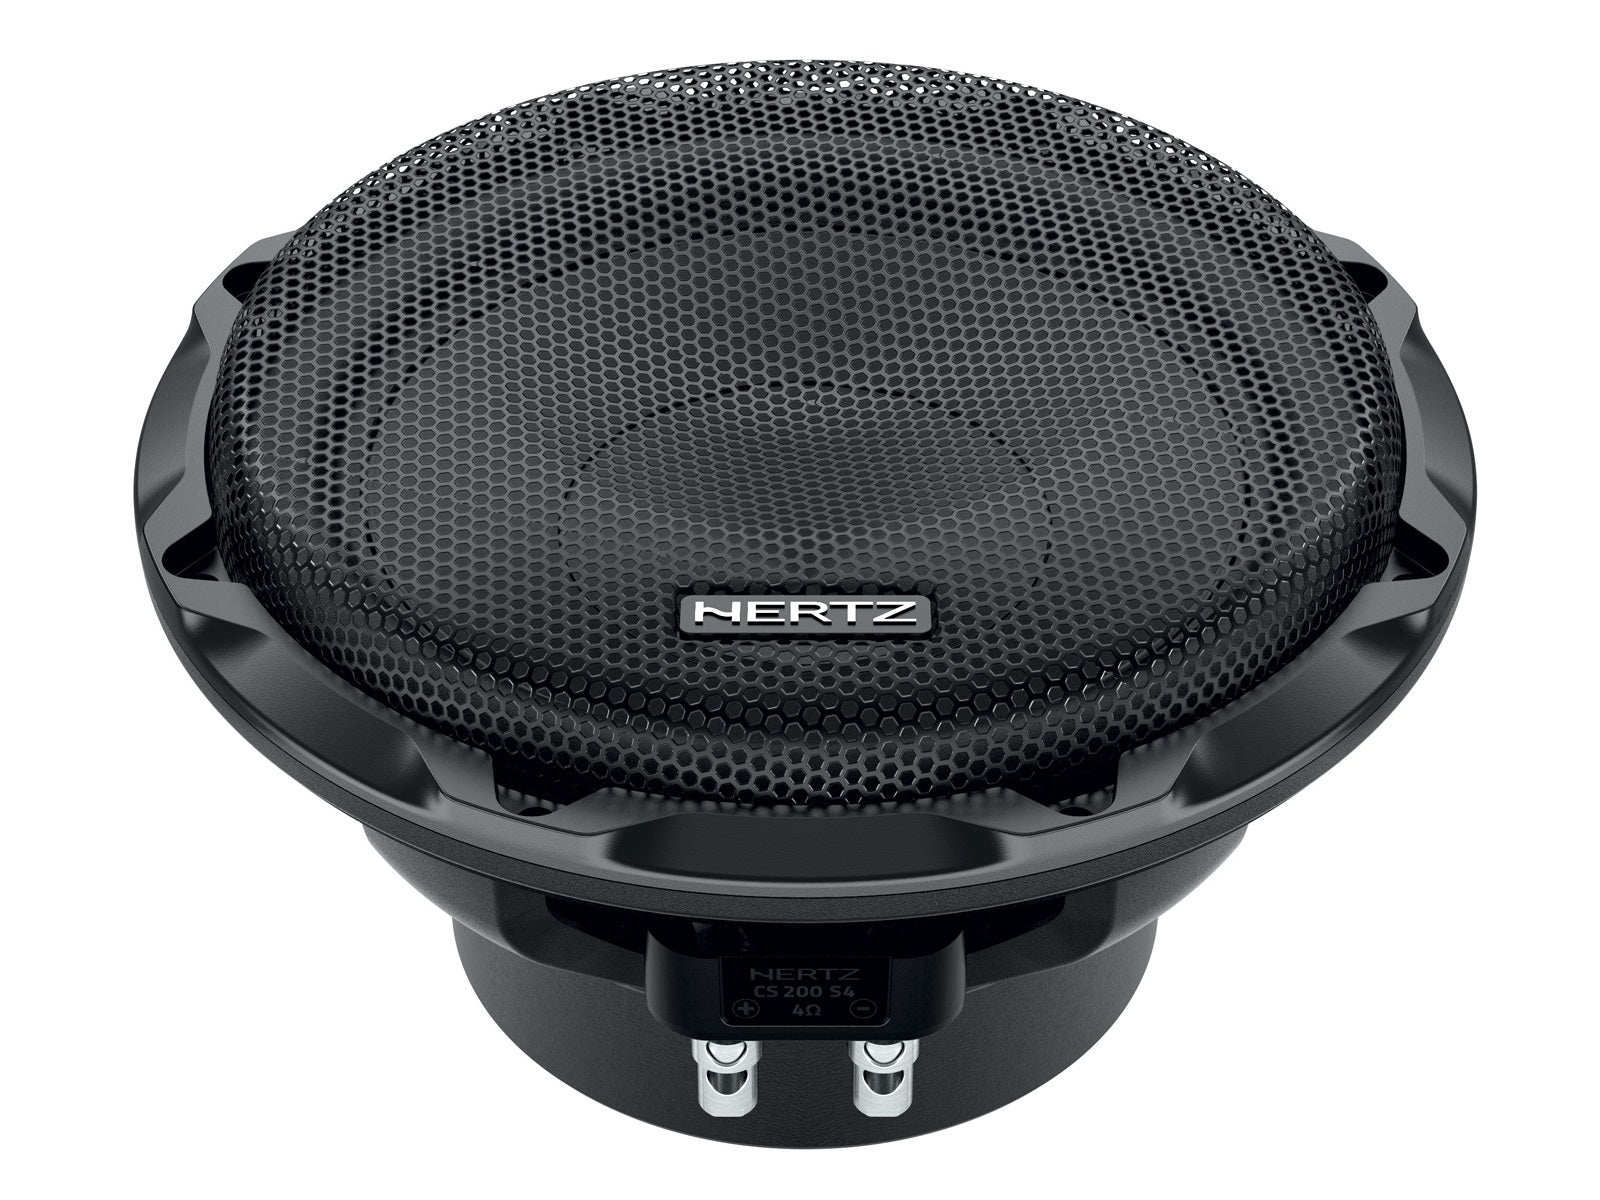 Hertz Cento CS 200 - Subwoofer with Grille